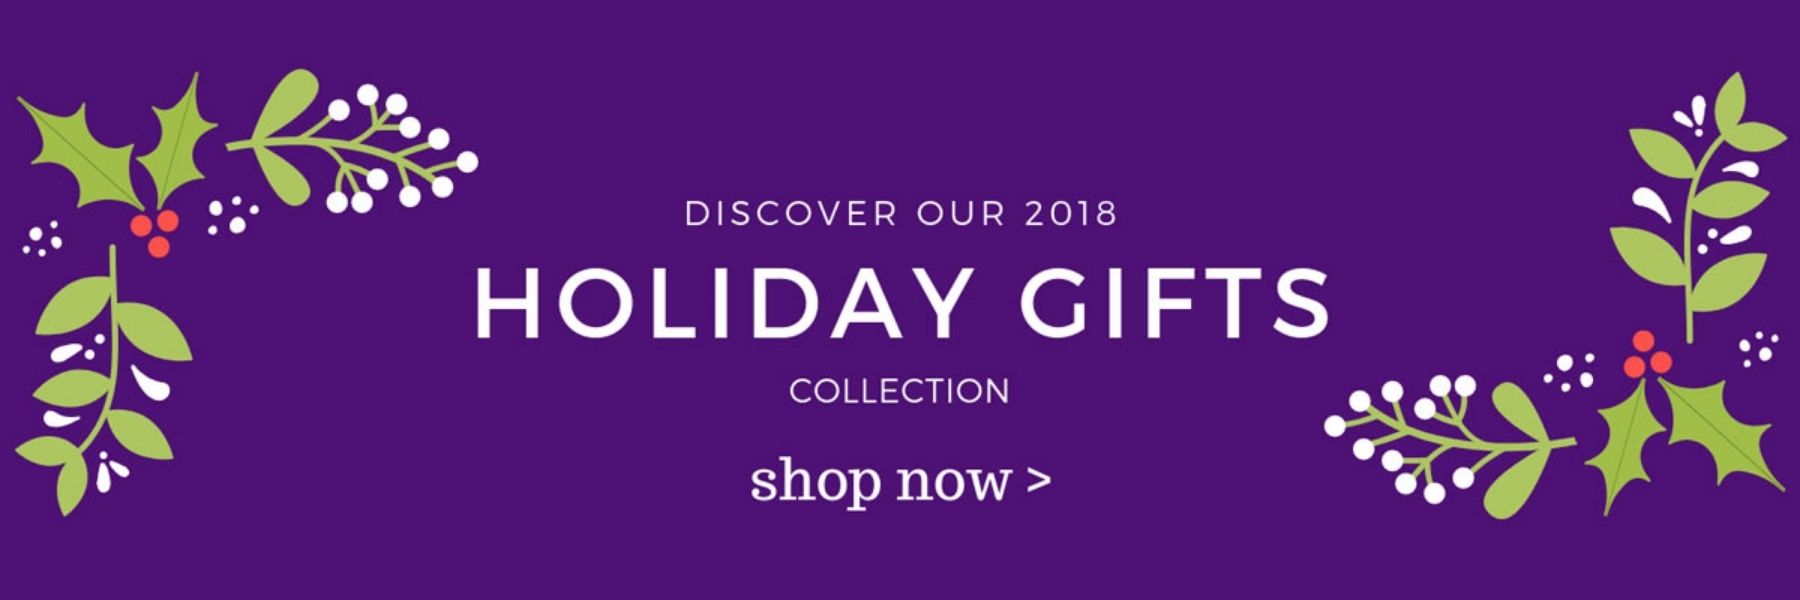 Dilettante Chocolates Holiday Gift Guide 2018 Blog Banner